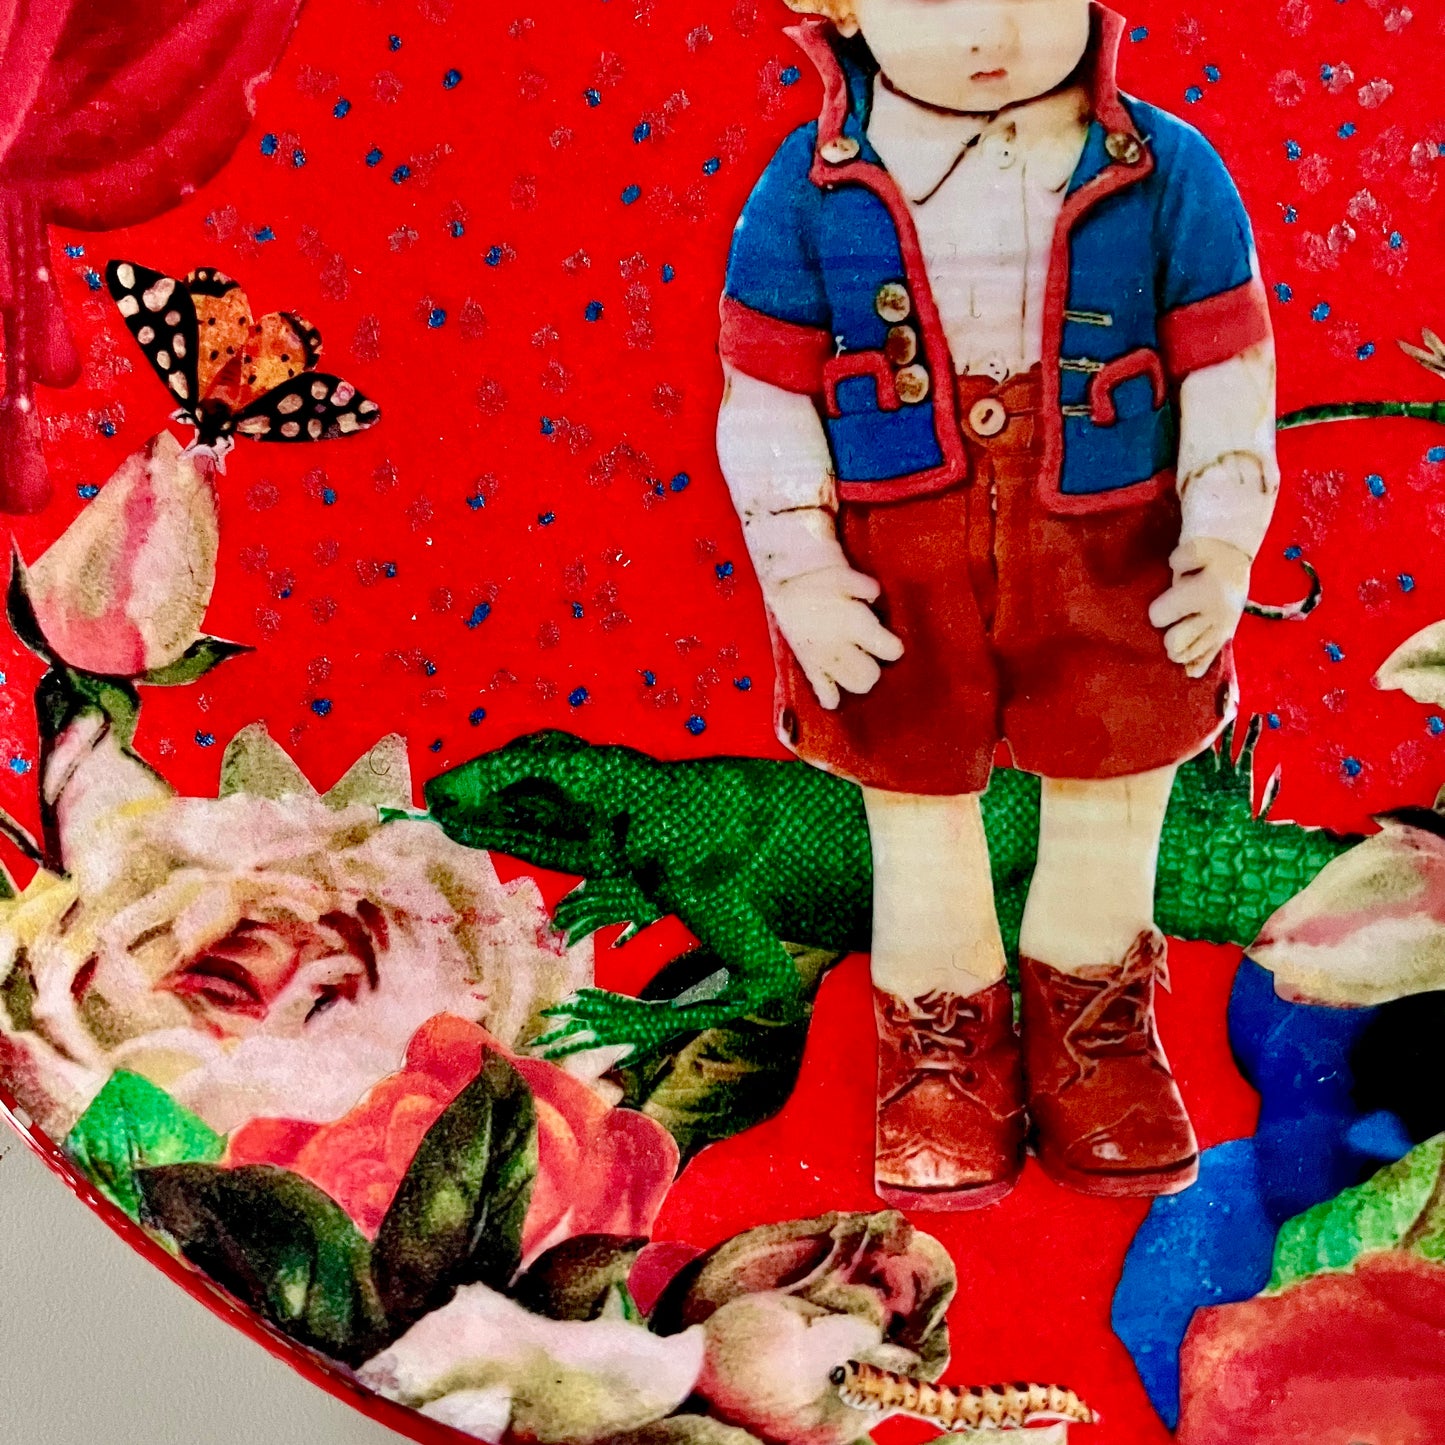 "Stop Making Sense" Wall Plate by House of Frisson,closeup detail of the collage showing a felt male doll, roses, and a lizard, against a red background.